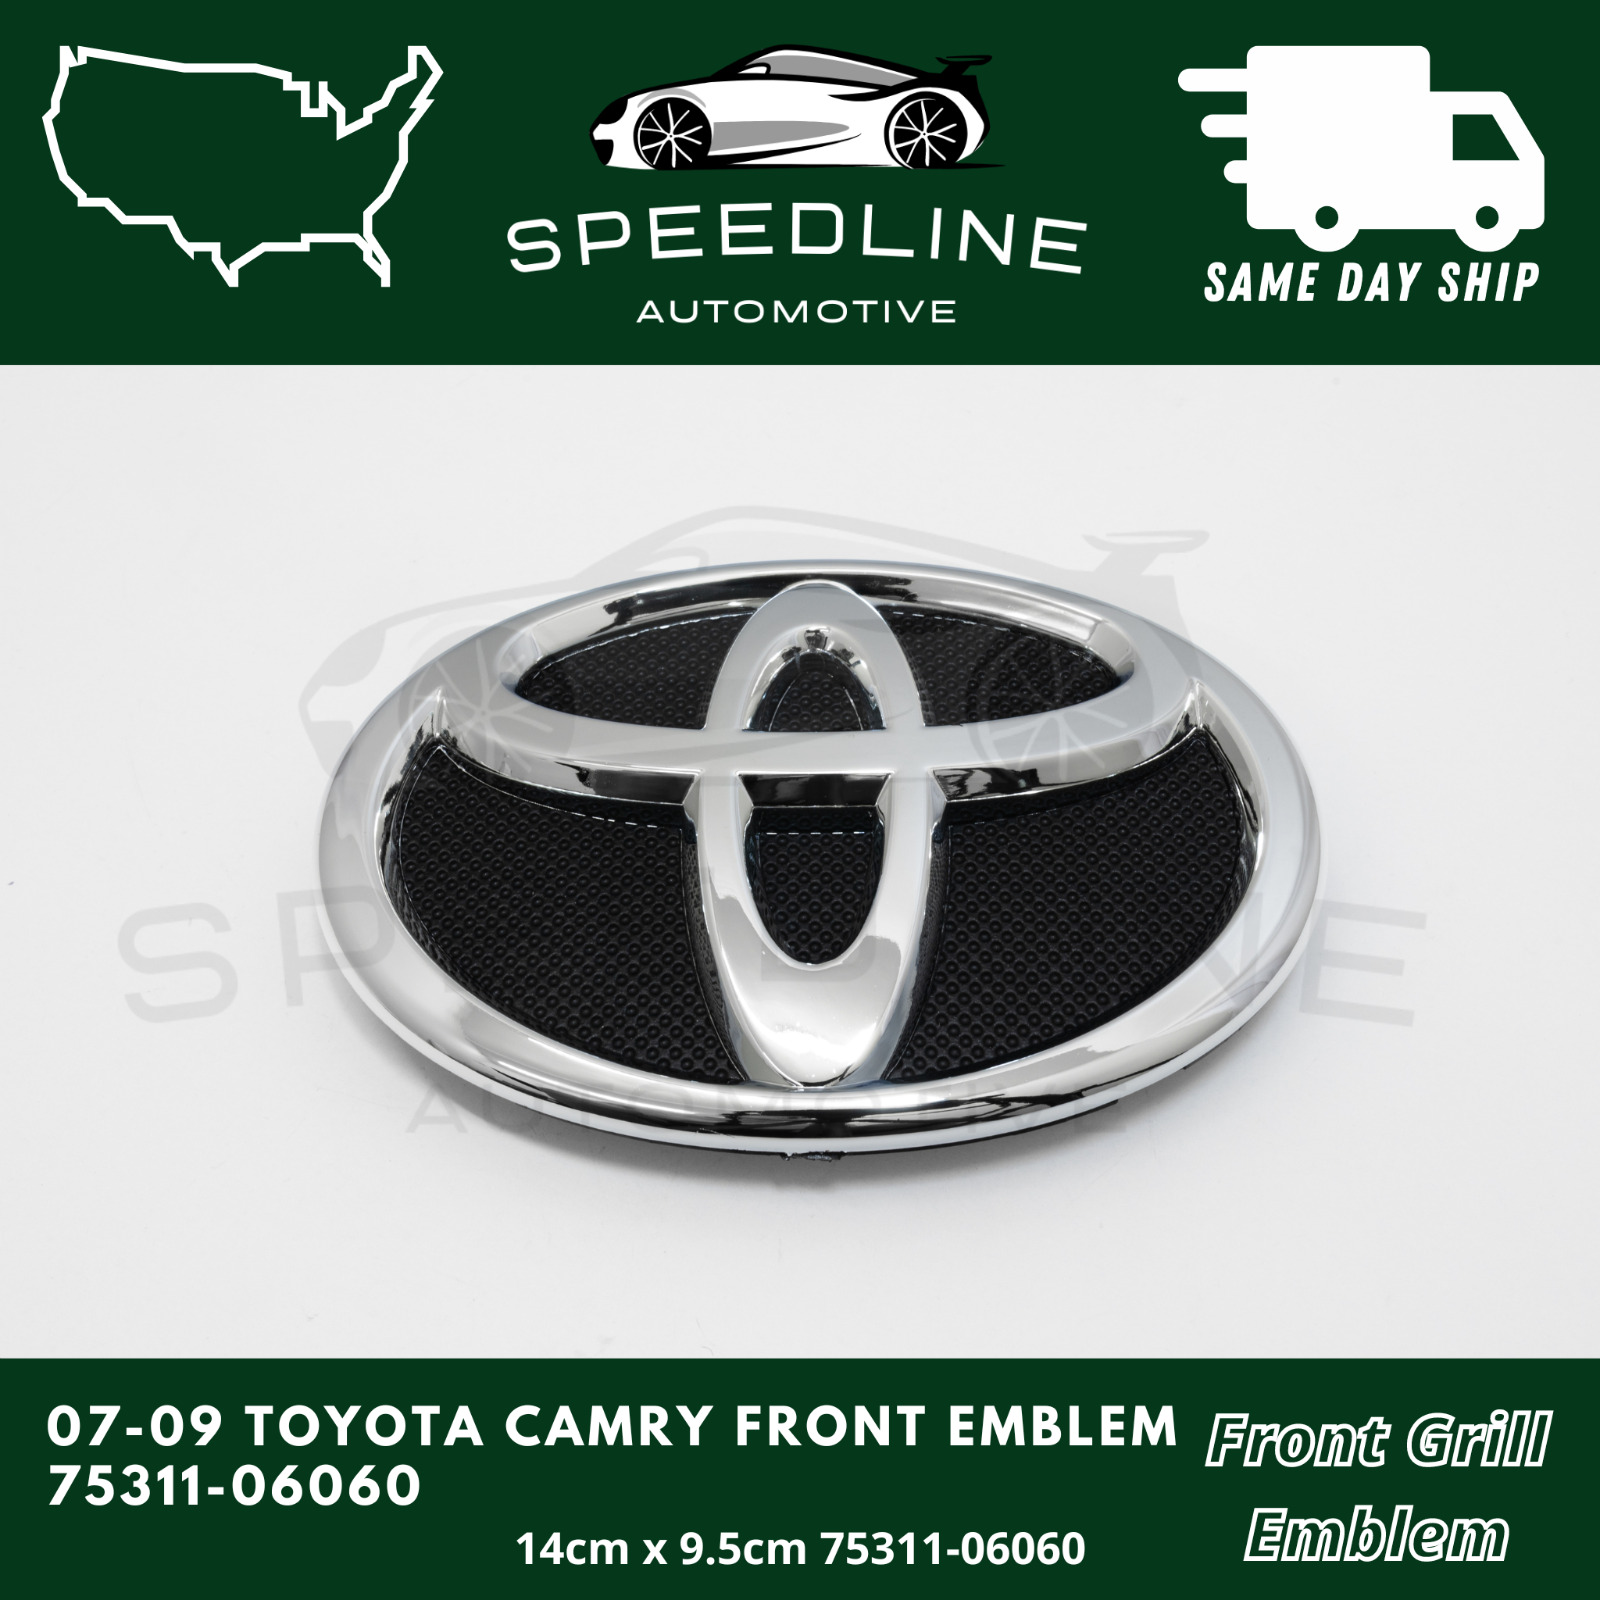 07-09 TOYOTA CAMRY FRONT EMBLEM GRILLE/GRILL CHROME BADGE BUMPER LOGO